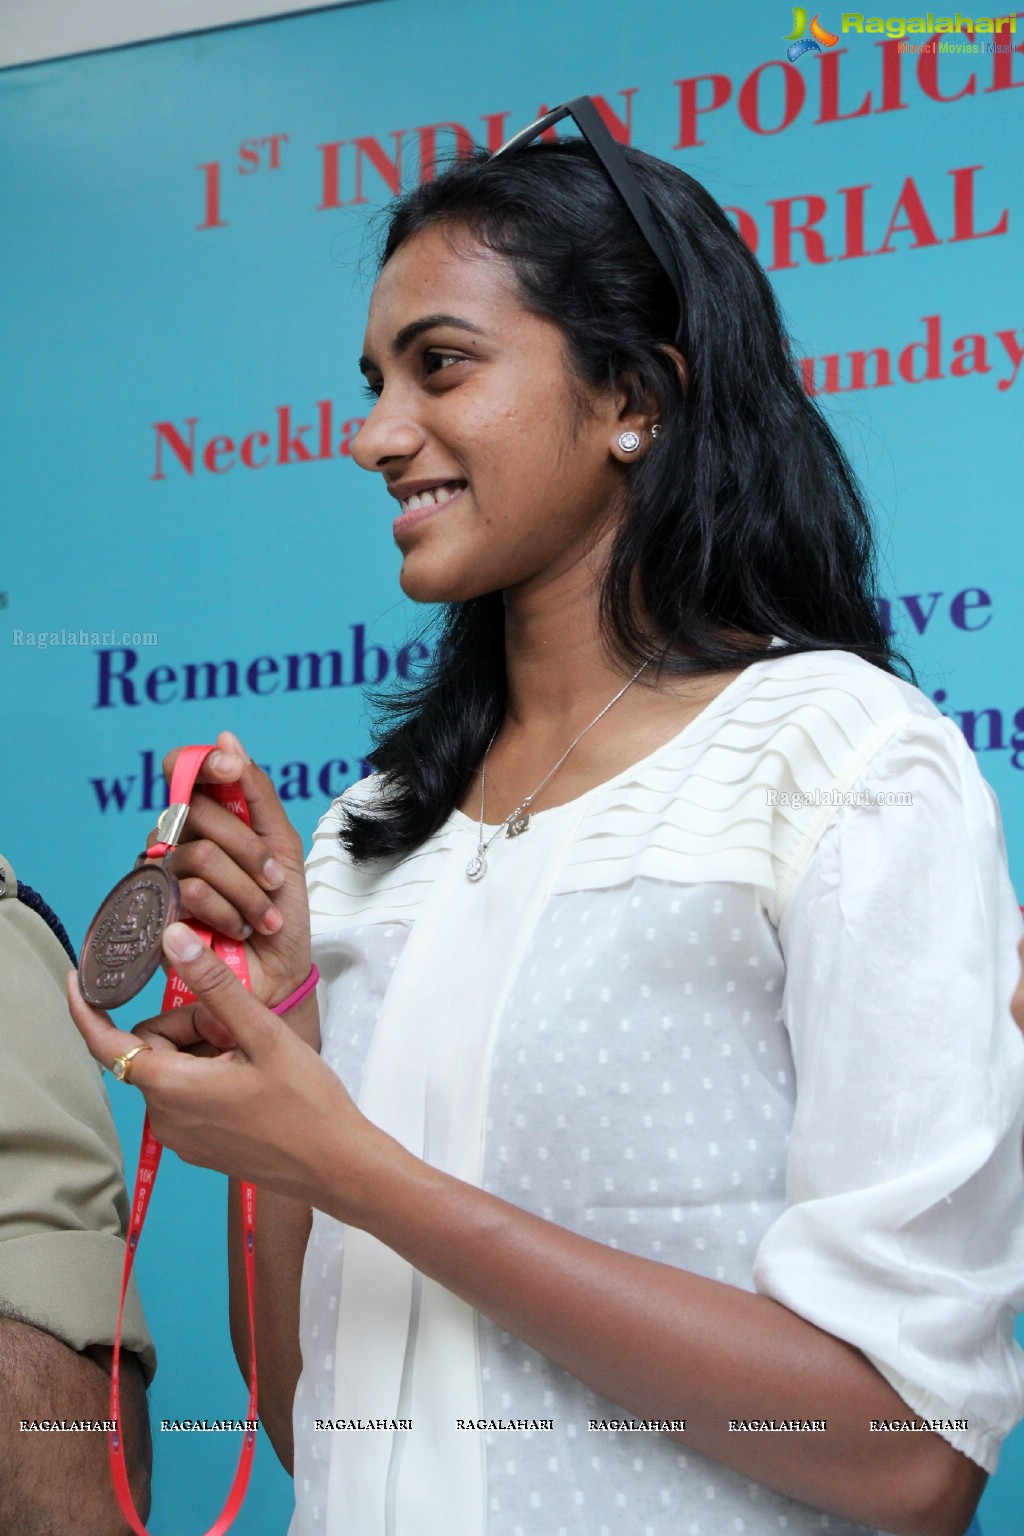 PV Sindhu unveiled T-Shirts and Medals of First Indian Police Martys Memorial Run, Hyderabad